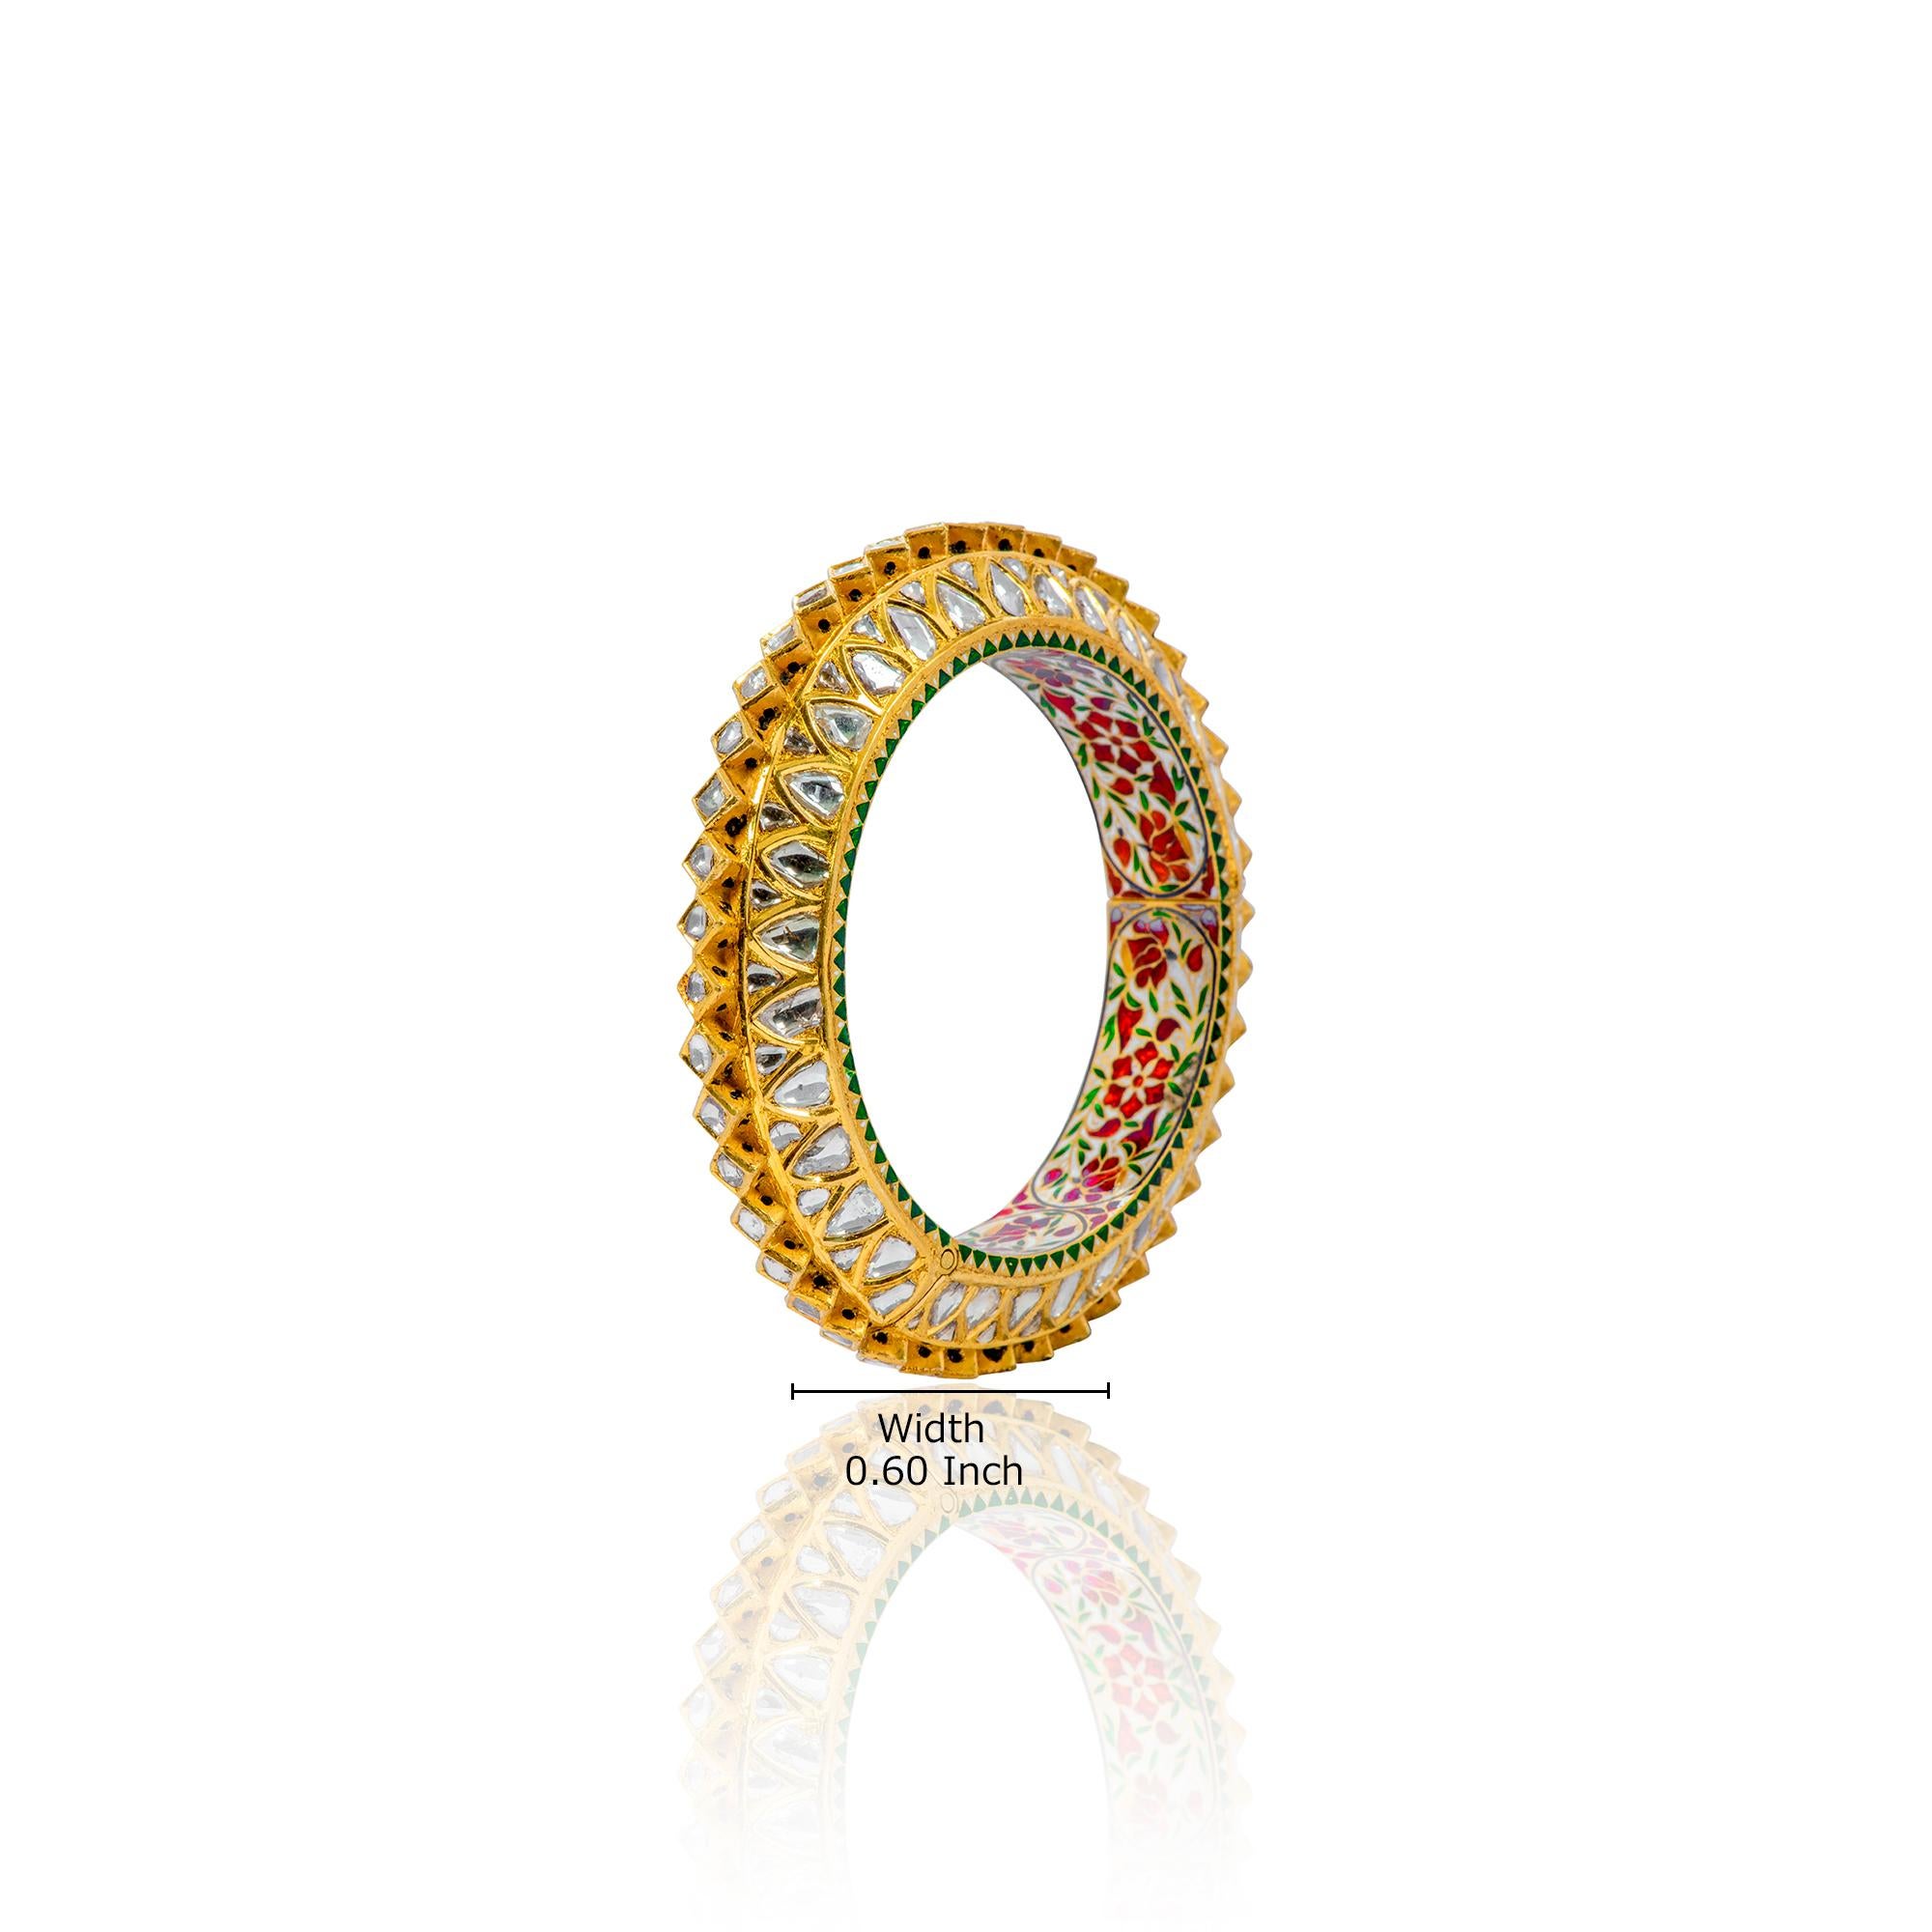 Uncut 22 Karat Yellow Gold Diamond and Red Enamel Handcrafted Bangle For Sale